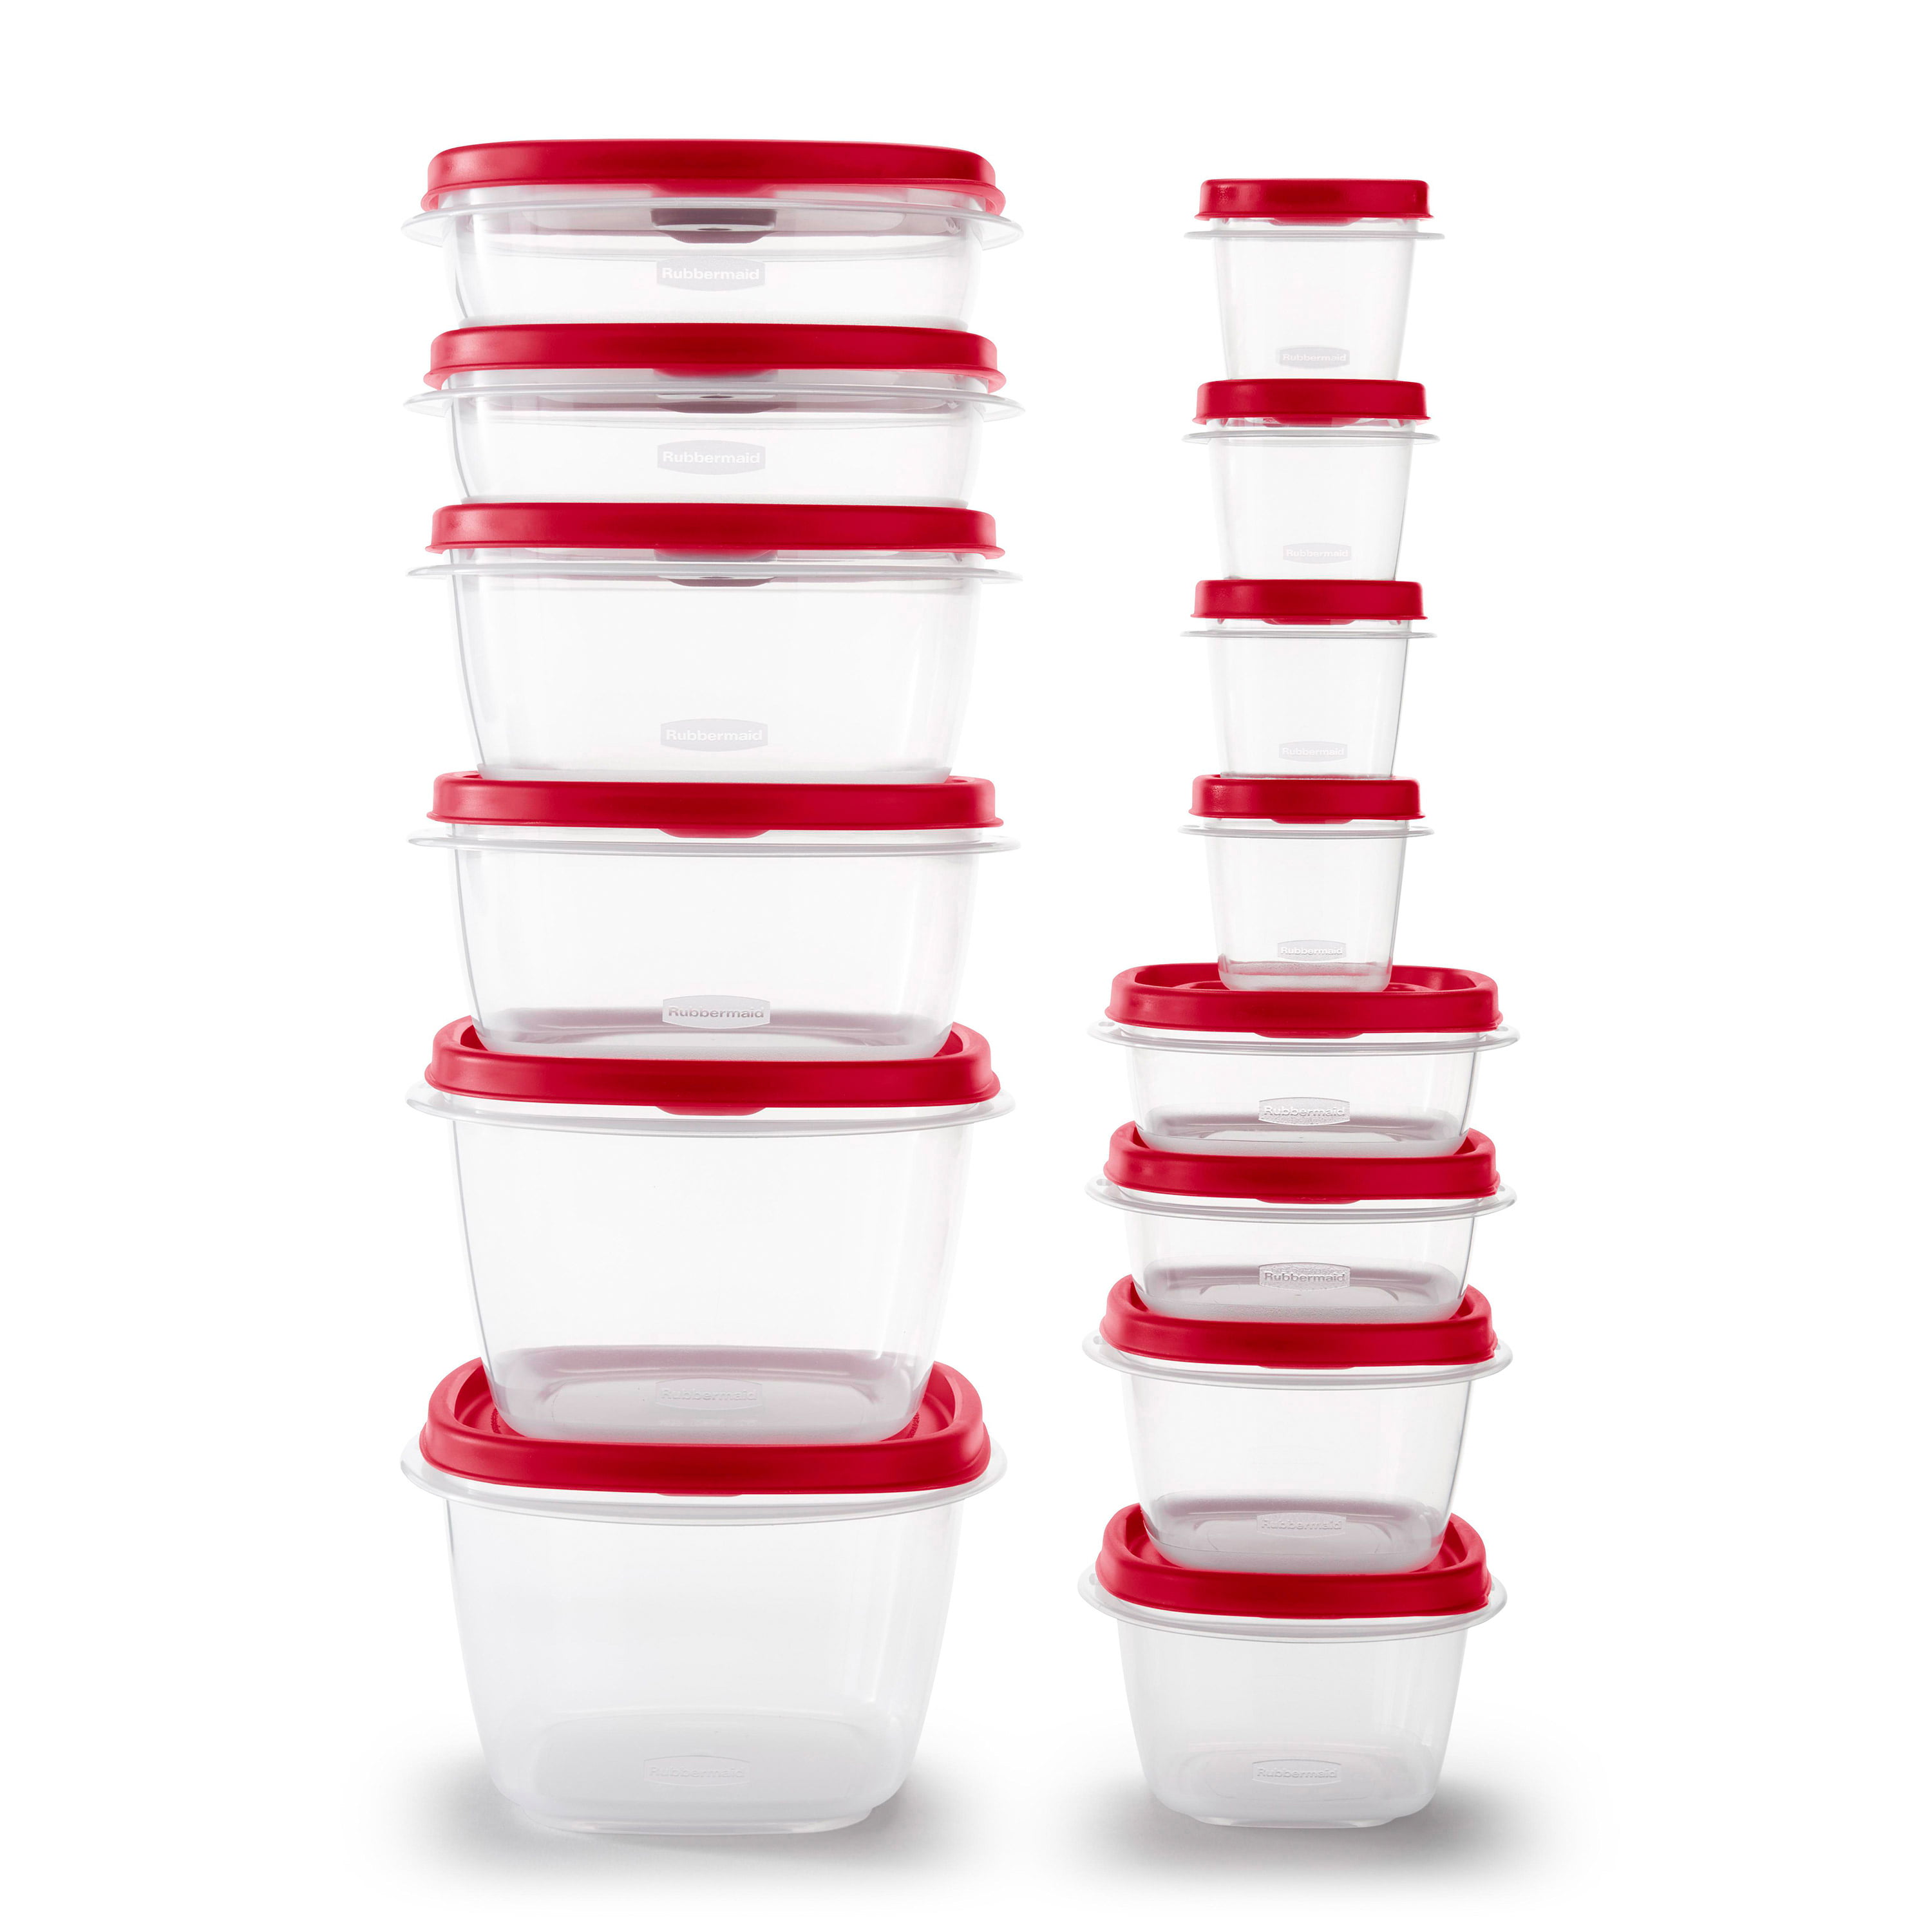 KITHELP 28 pieces food storage containers w/lids extra large